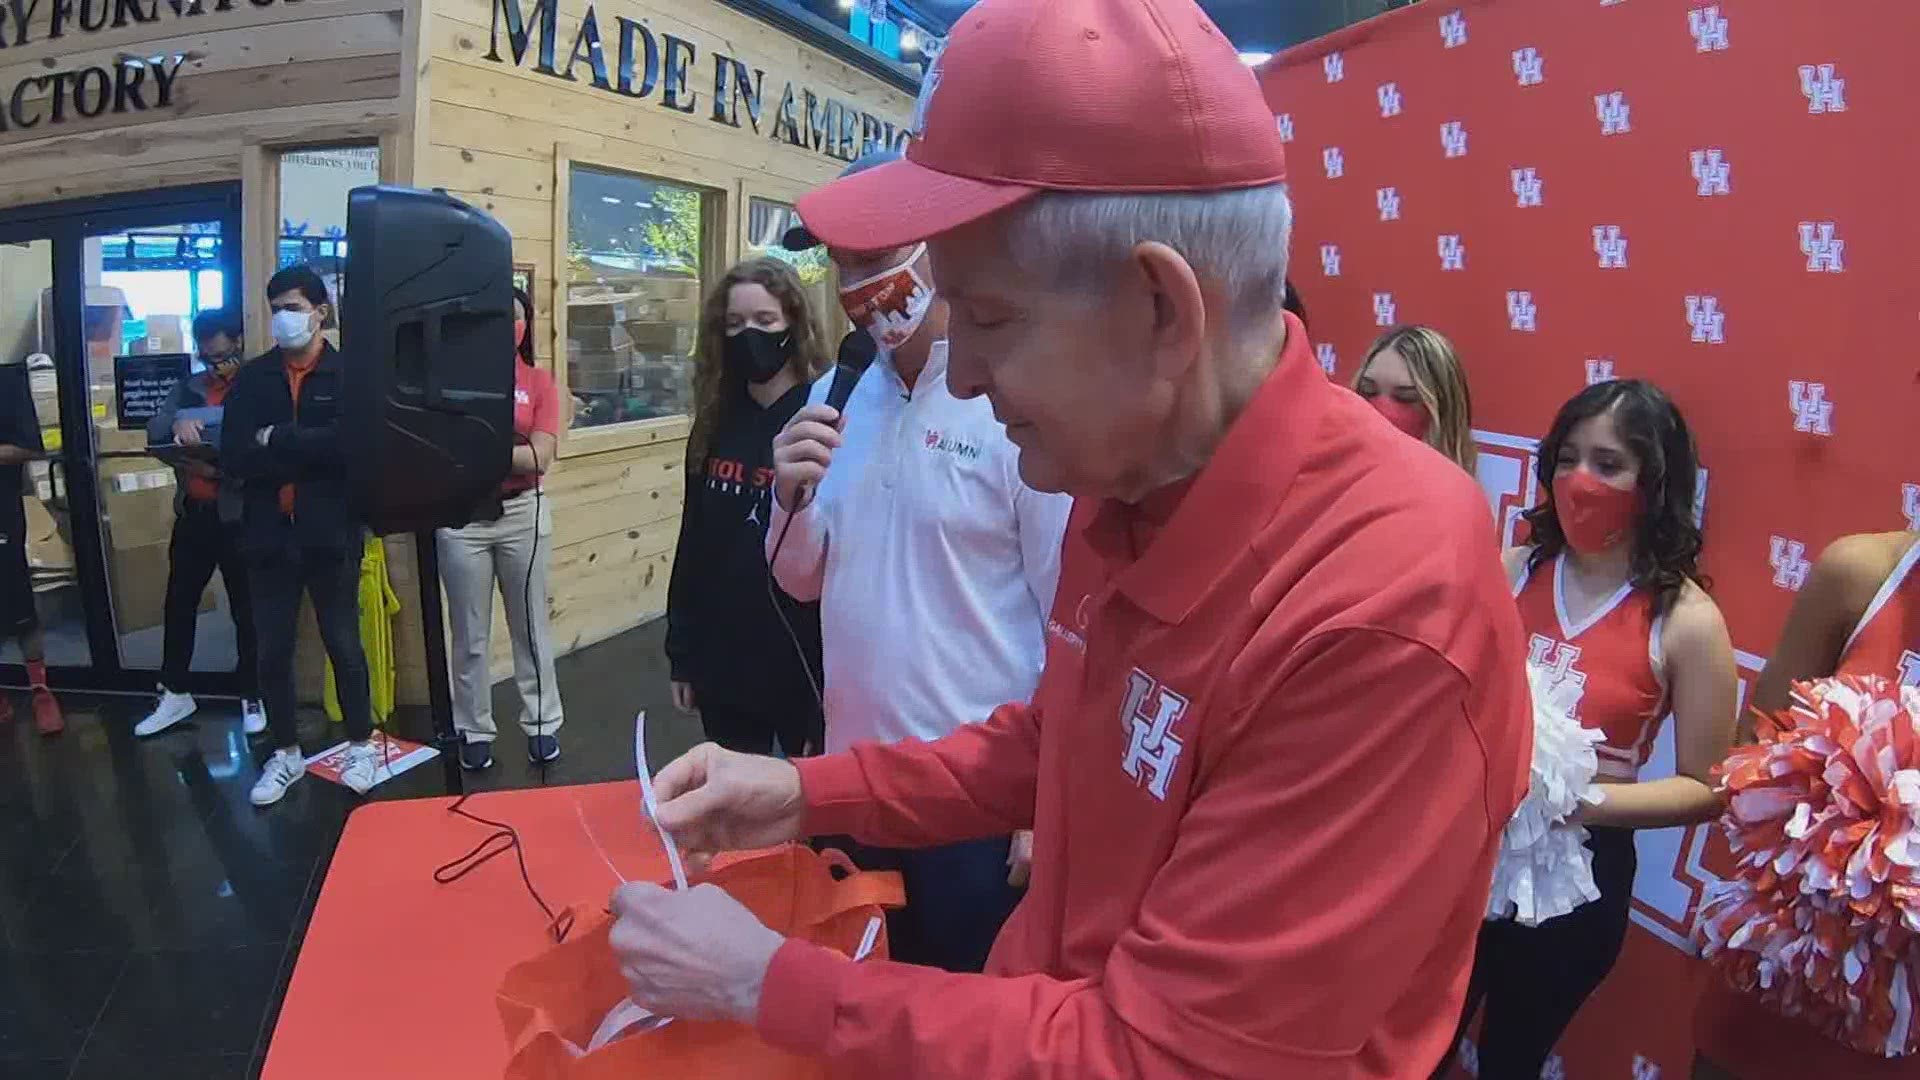 More than a hundred University of Houston students and fans are headed to watch the Coogs compete in the Final Four all thanks to Jim "Mattress Mack" McIngvale.